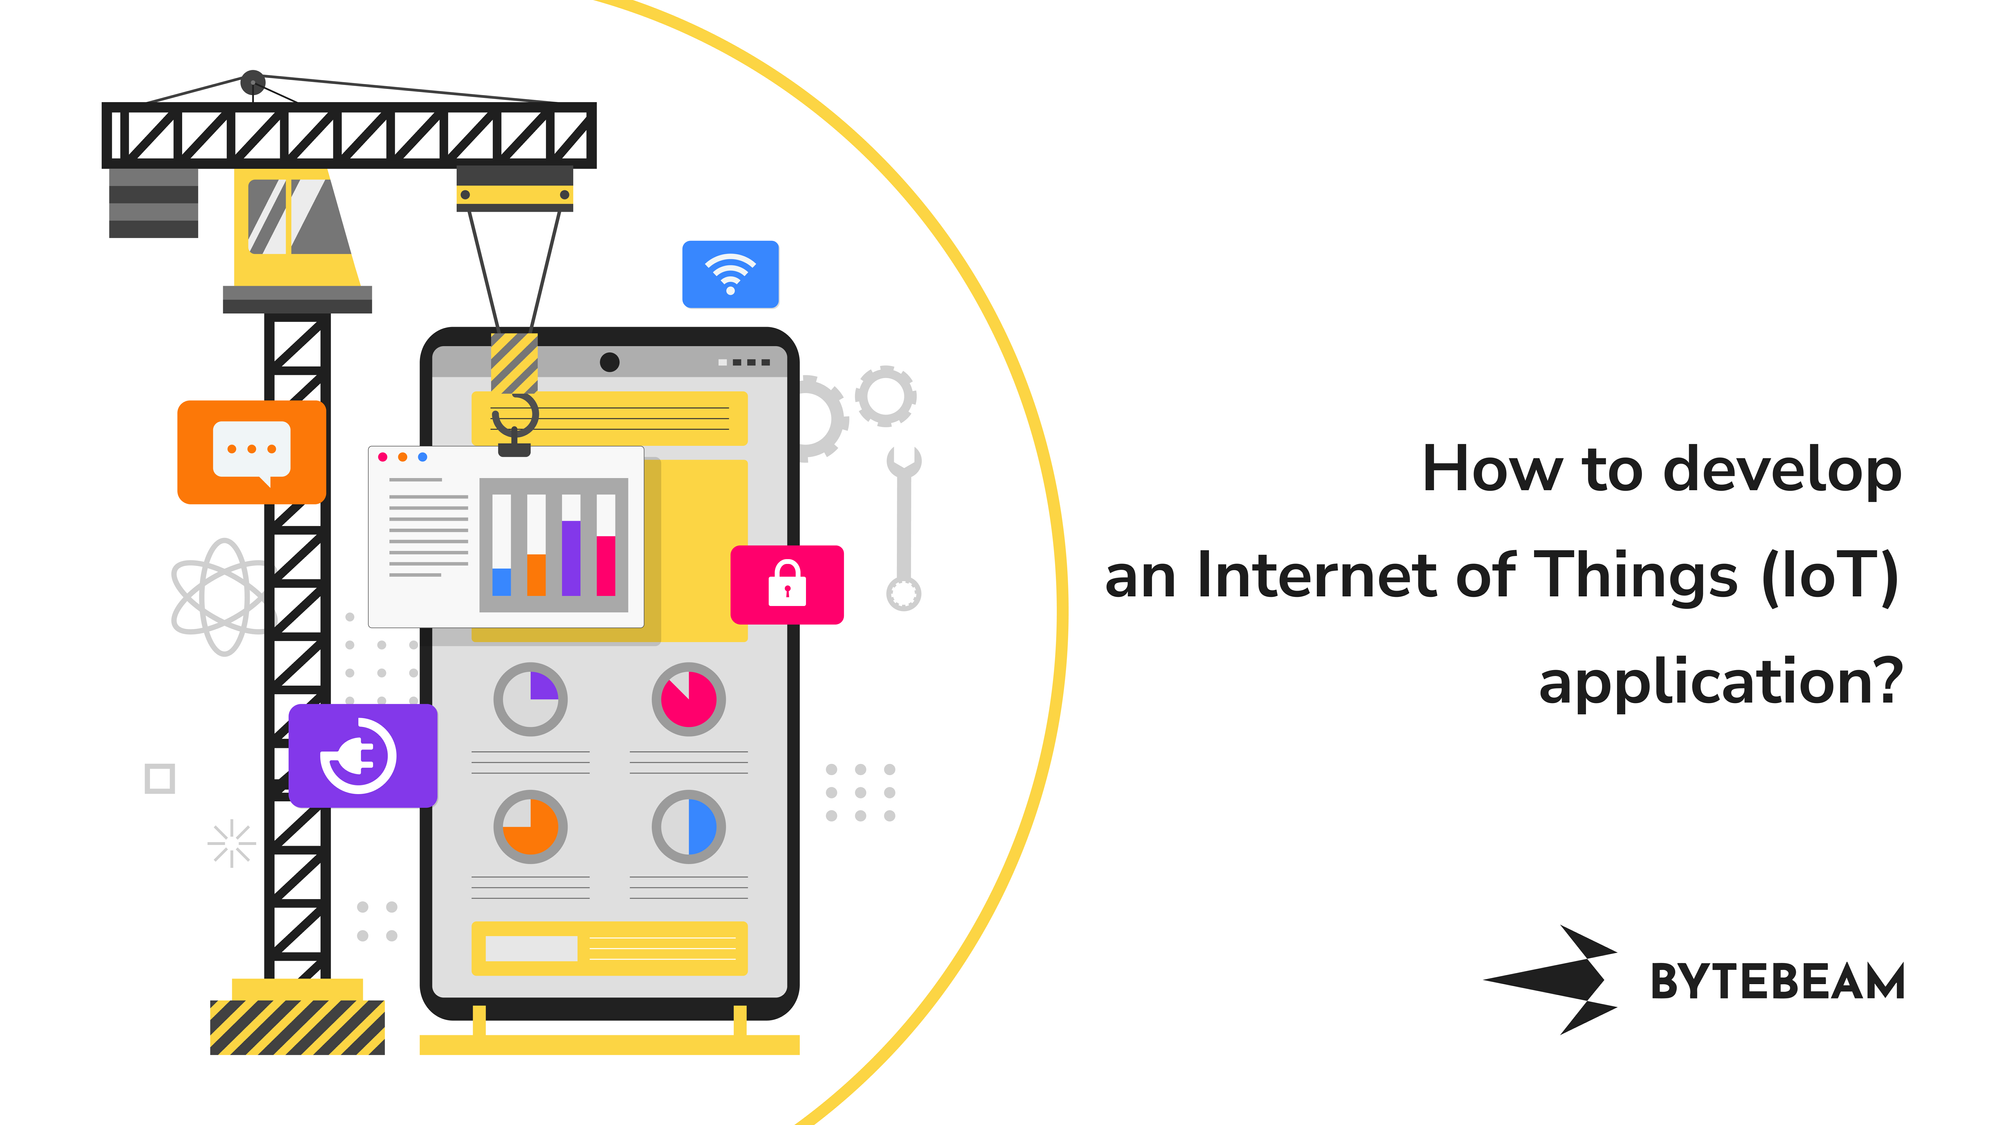 How to develop an Internet of Things (IoT) application?